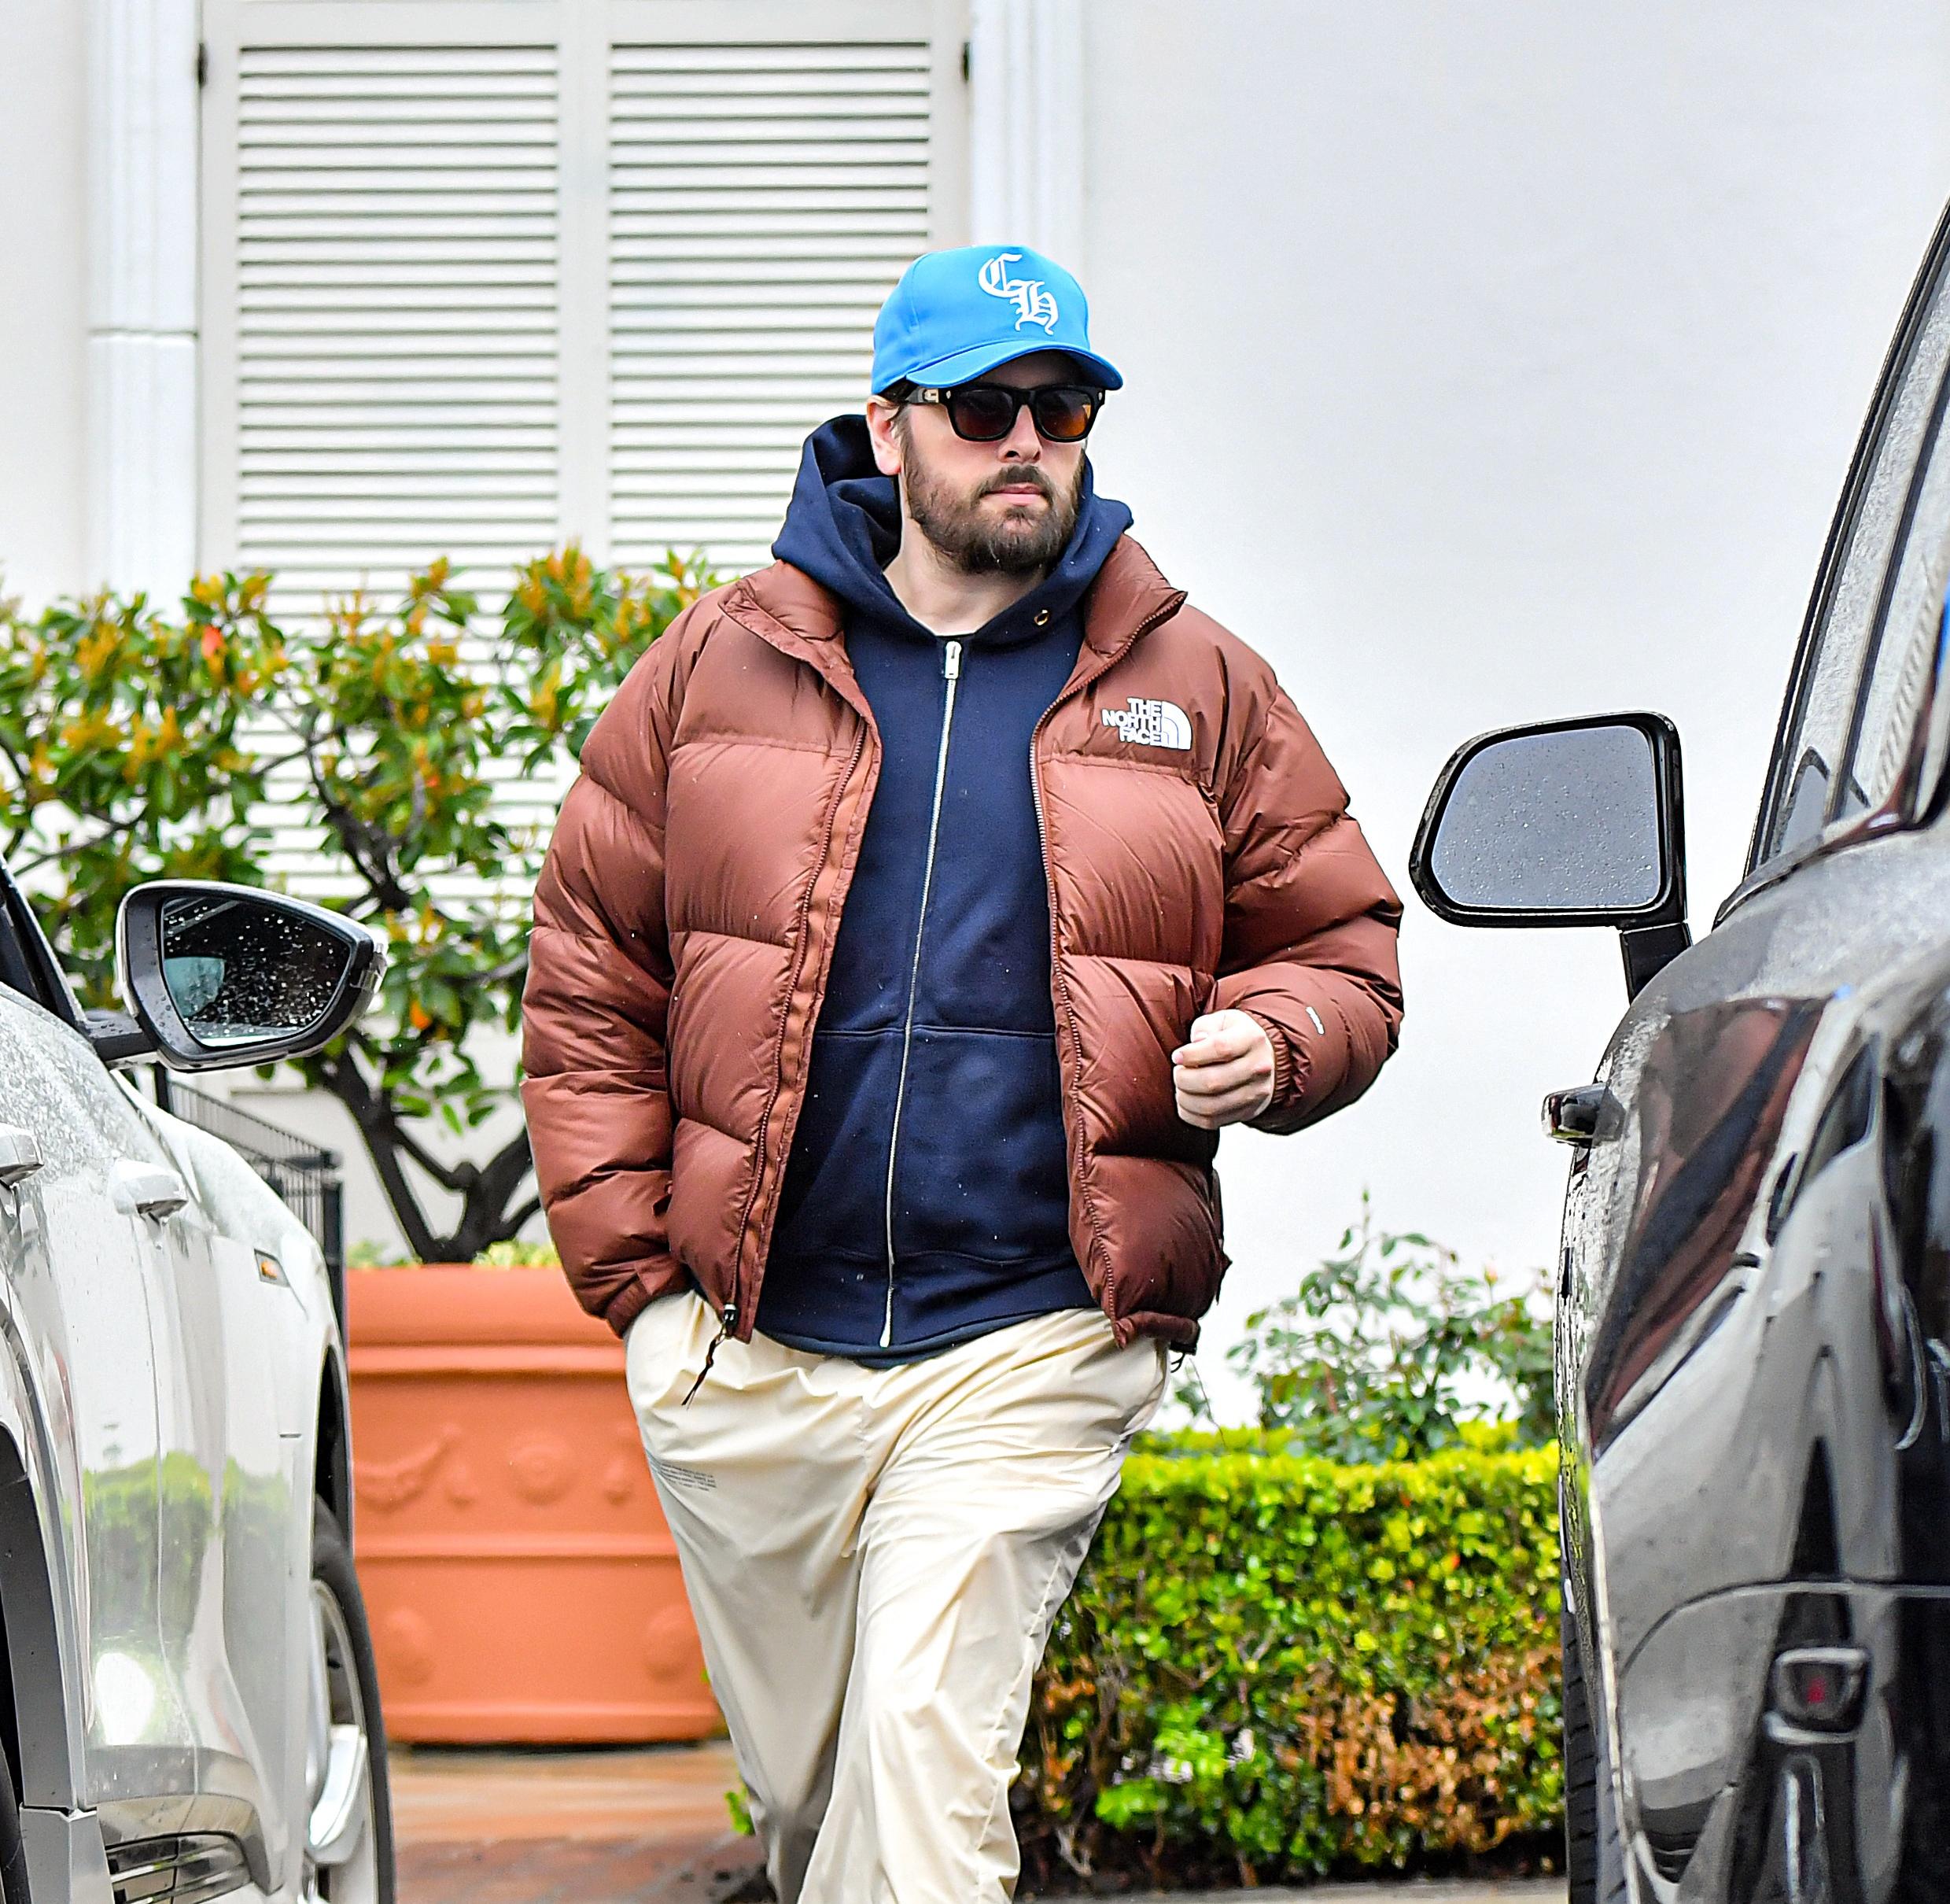 Scott Disick Spotted Out After Shopping For Jewelry In Calabasas, CA.